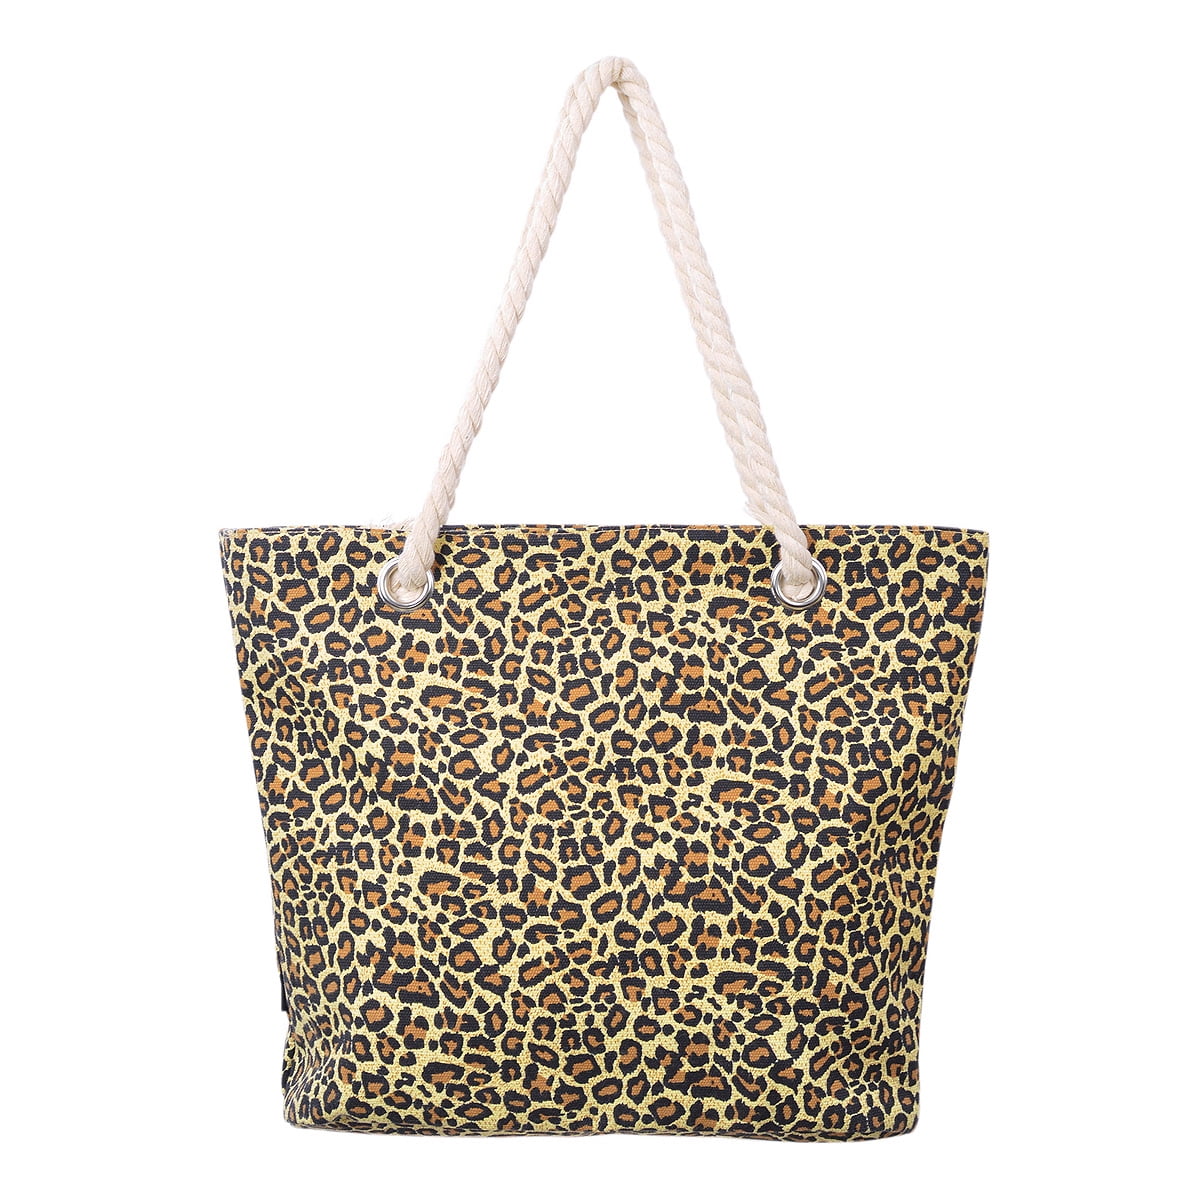 Animal Lover Gift Travel Bag Animal Pattern Leopard Print Brown Tote Large Tote Bag Gold Leopard Spots Tote Bag Tote Bags for Women